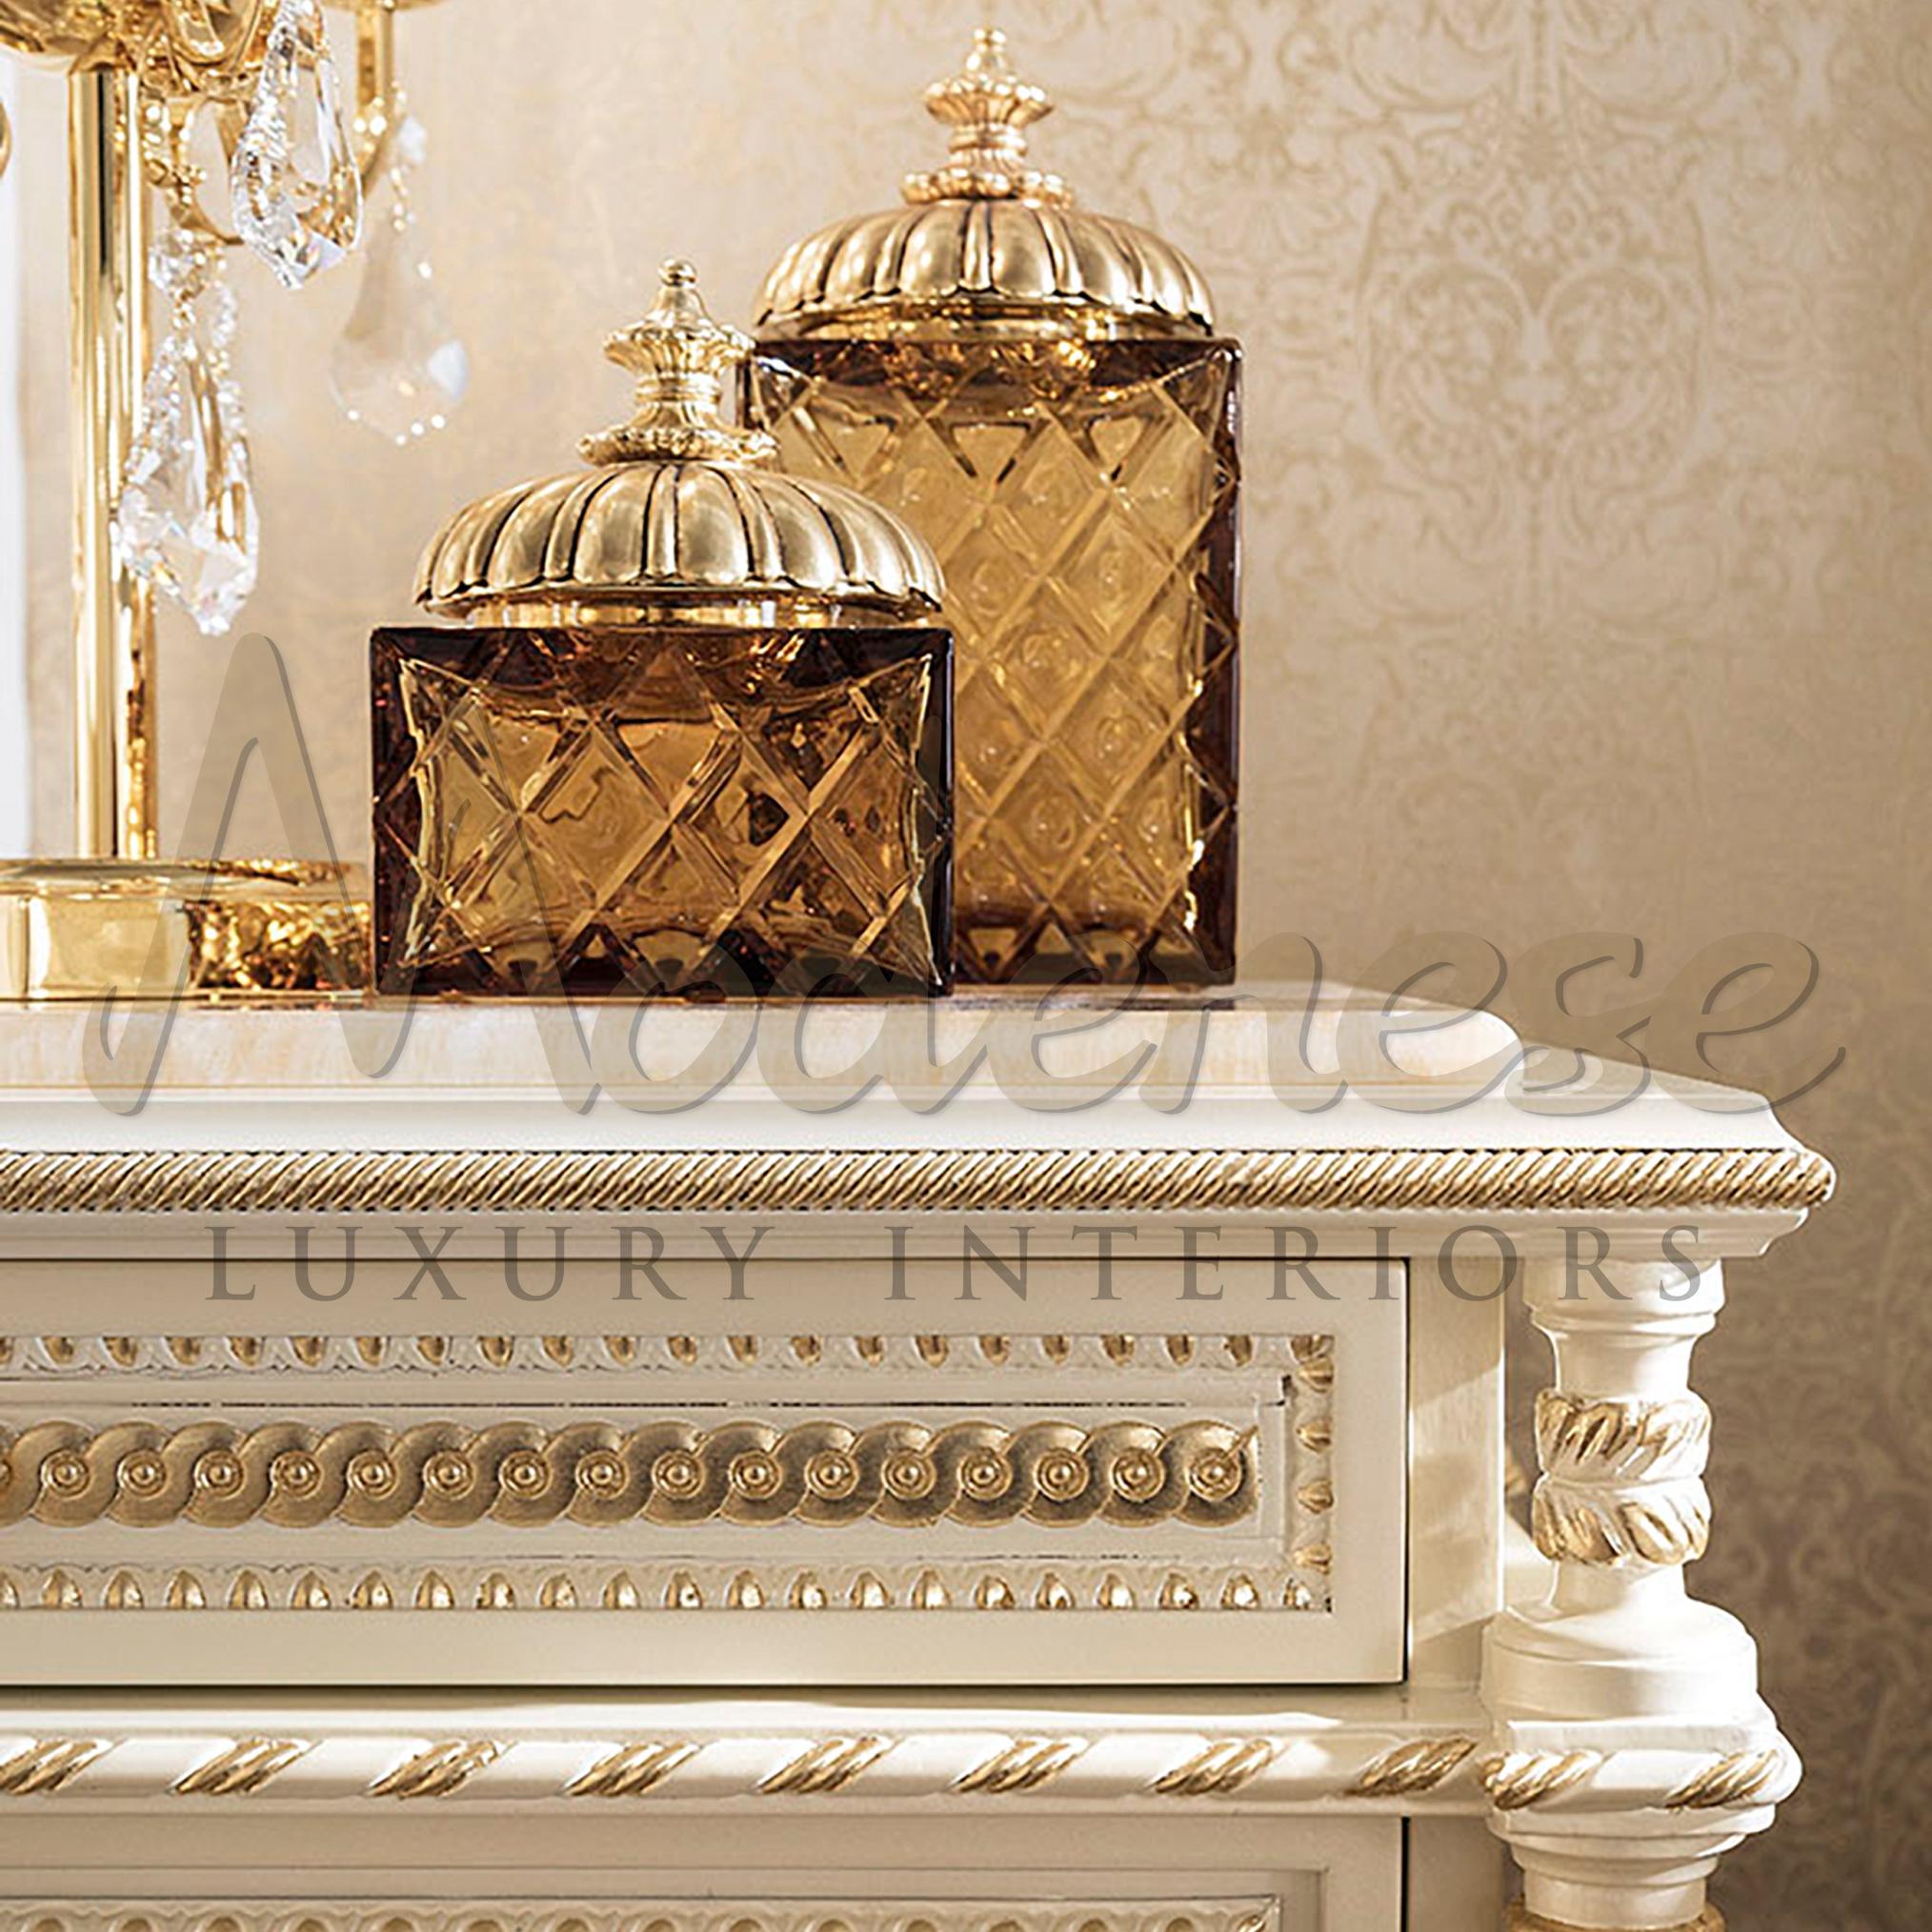 Luxurious empire-style dresser by Modenese Luxury Interiors, Italian furniture producer. Made of solid wood with white laquered finish, plus empire-style wood carved columns, silver leaf details and golden knobs, the great advantages of this